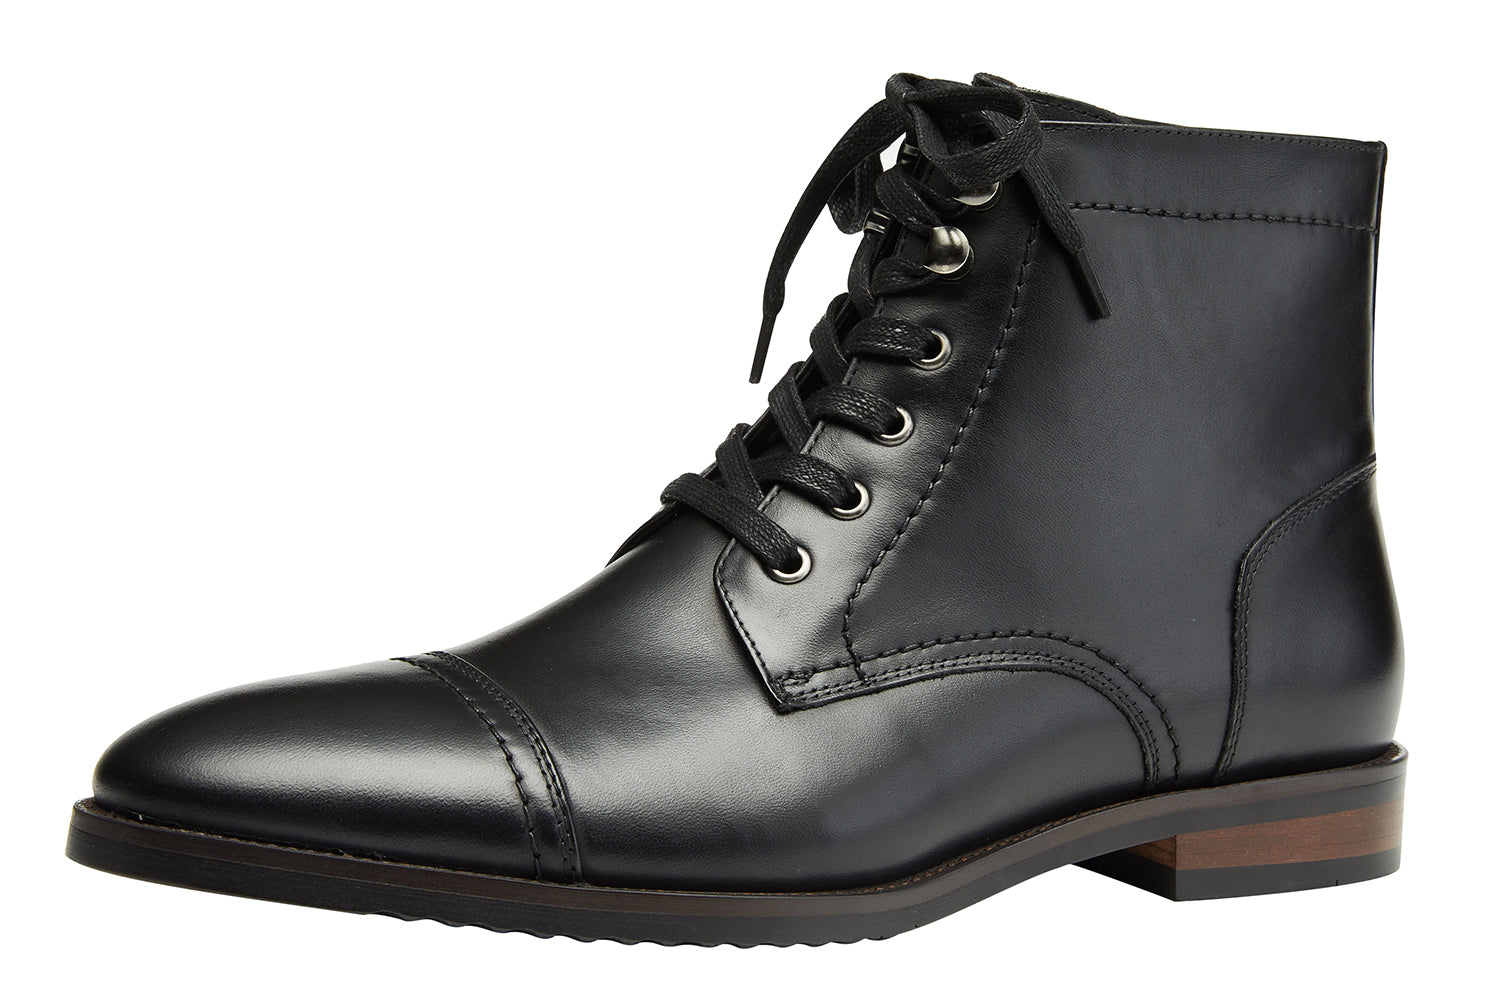 Men's Formal Leather Dress Boots